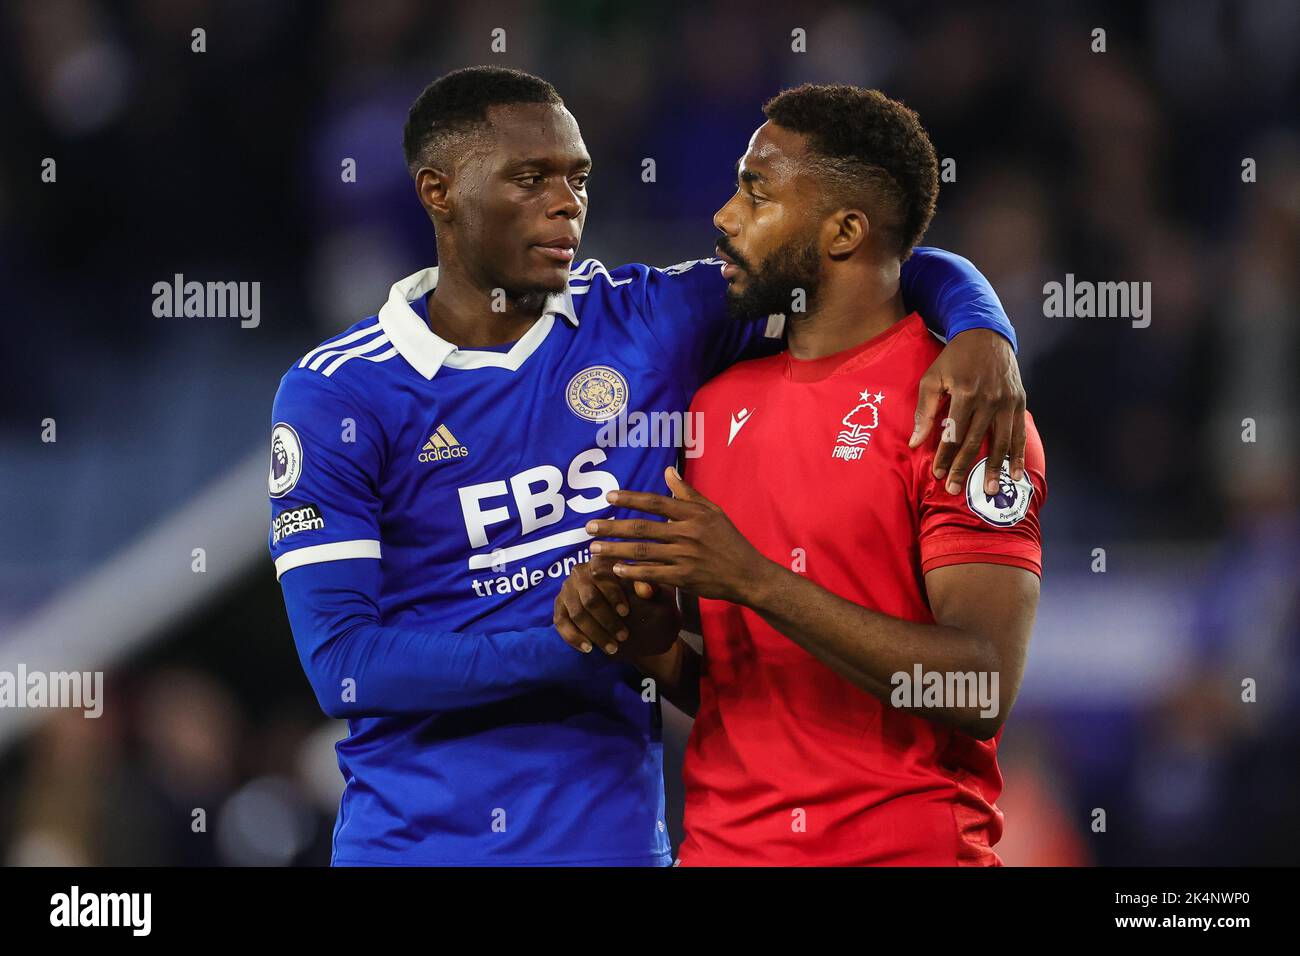 Patson Daka #20 of Leicester City and Emmanuel Dennis #25 of Nottingham Forest shake hands at the end of the  Premier League match Leicester City vs Nottingham Forest at King Power Stadium, Leicester, United Kingdom, 3rd October 2022  (Photo by Mark Cosgrove/News Images) Stock Photo